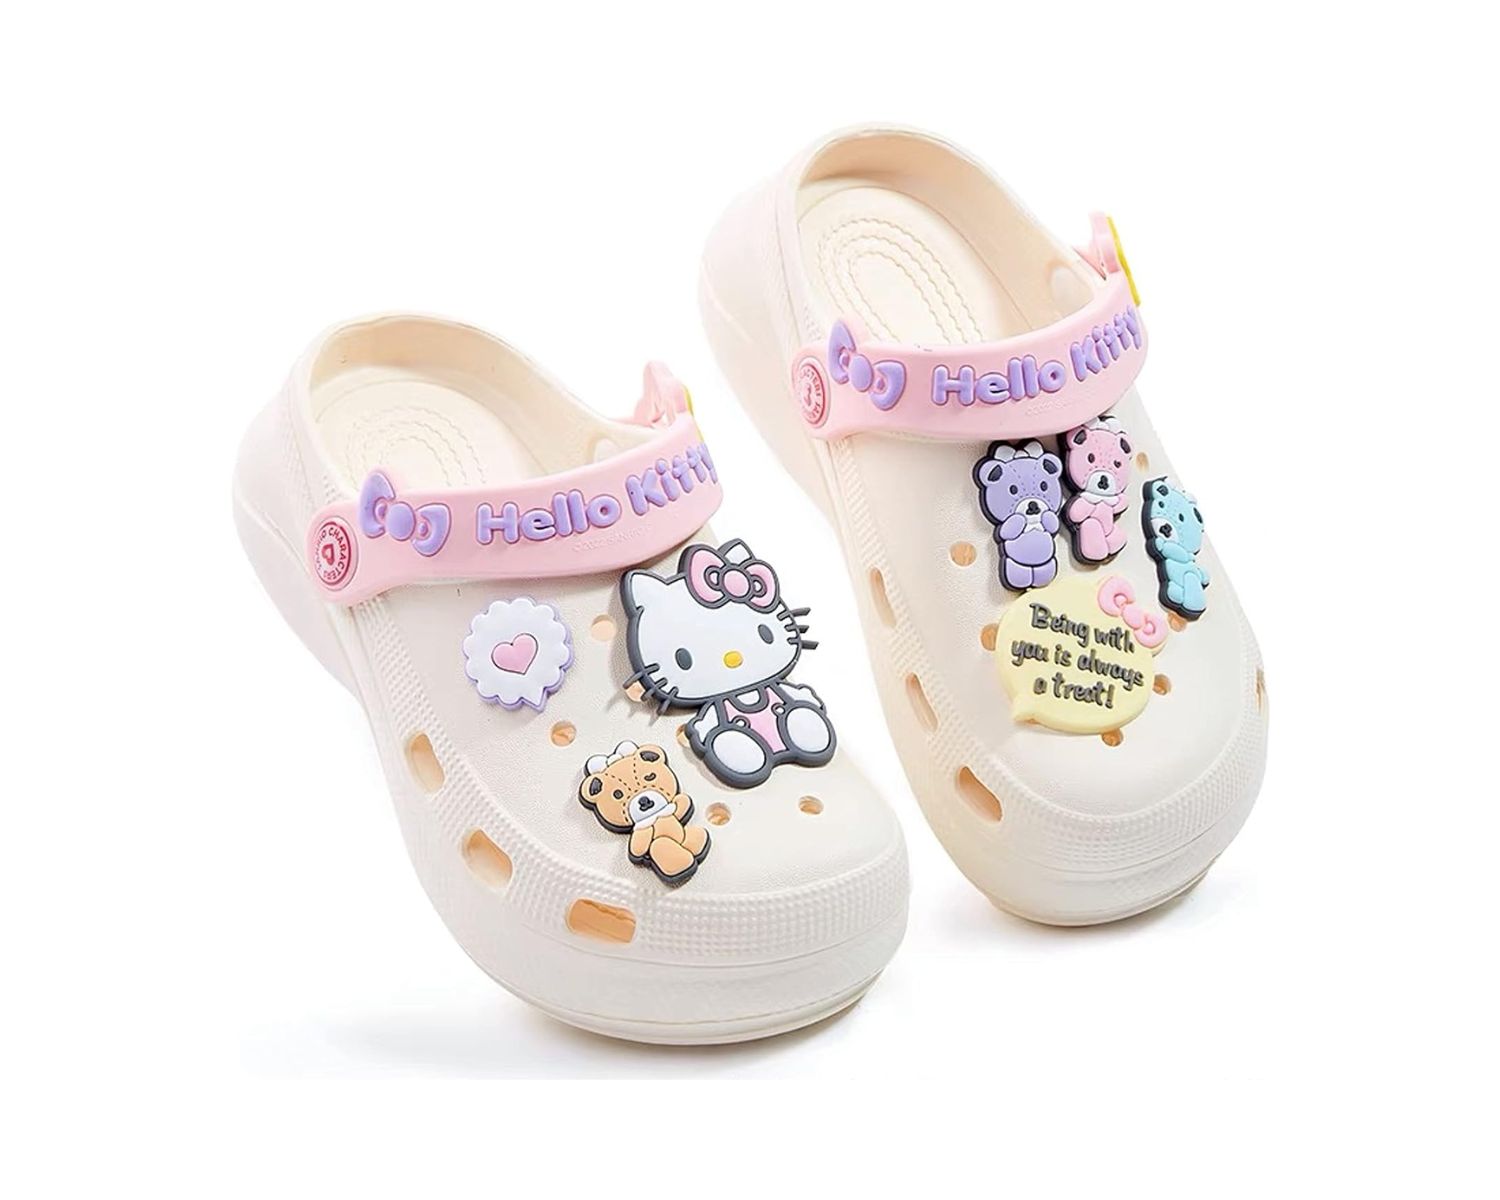 17-captivating-facts-about-hello-kitty-crocs